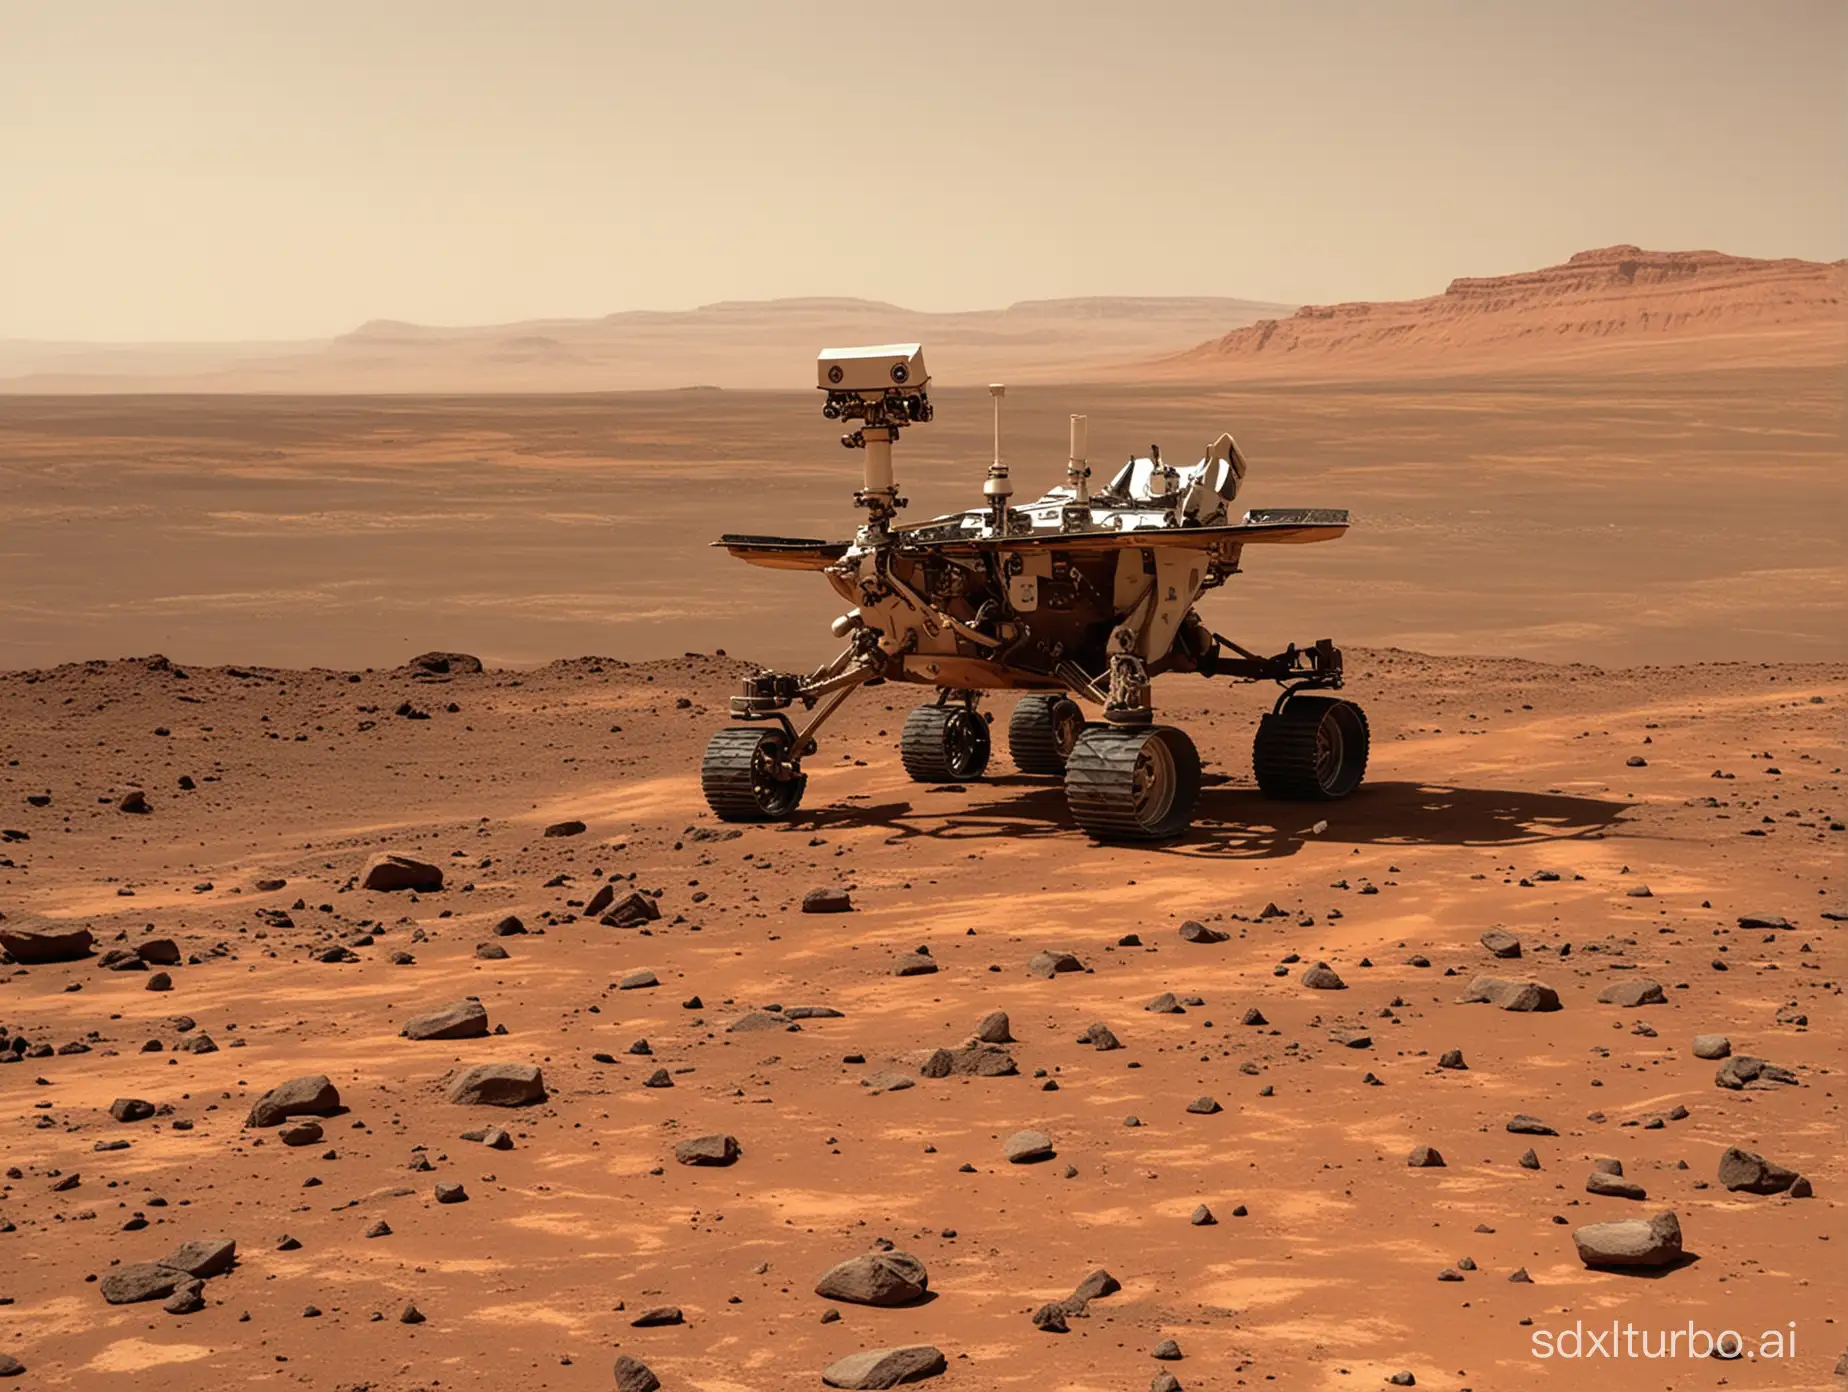 The rover is on Mars